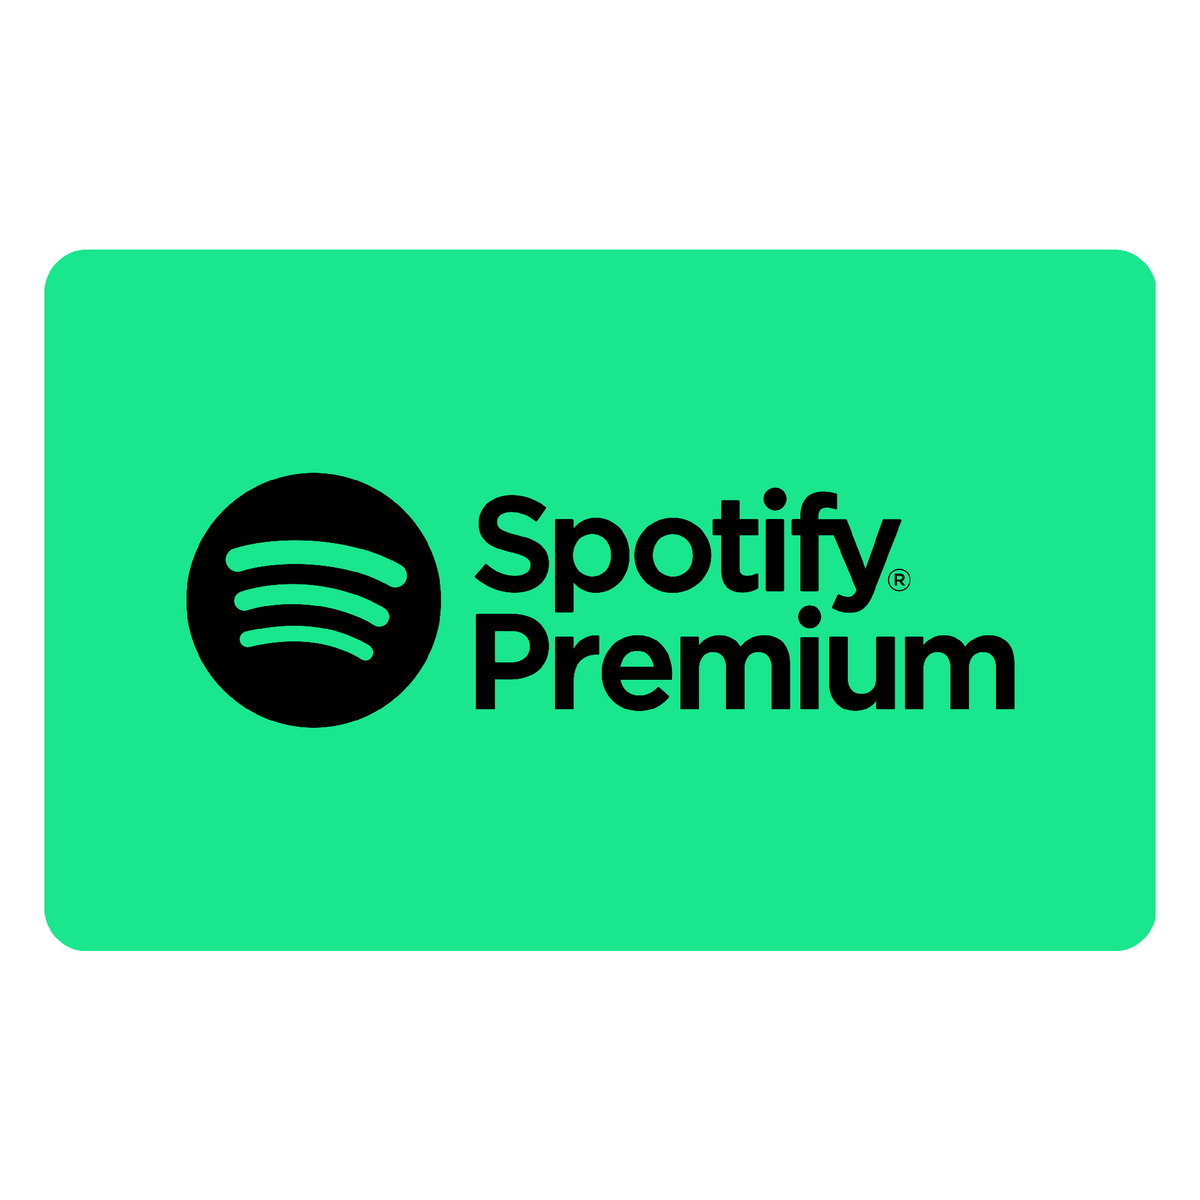 Spotify Premium Digital Gift Card, 6 Months Subscription